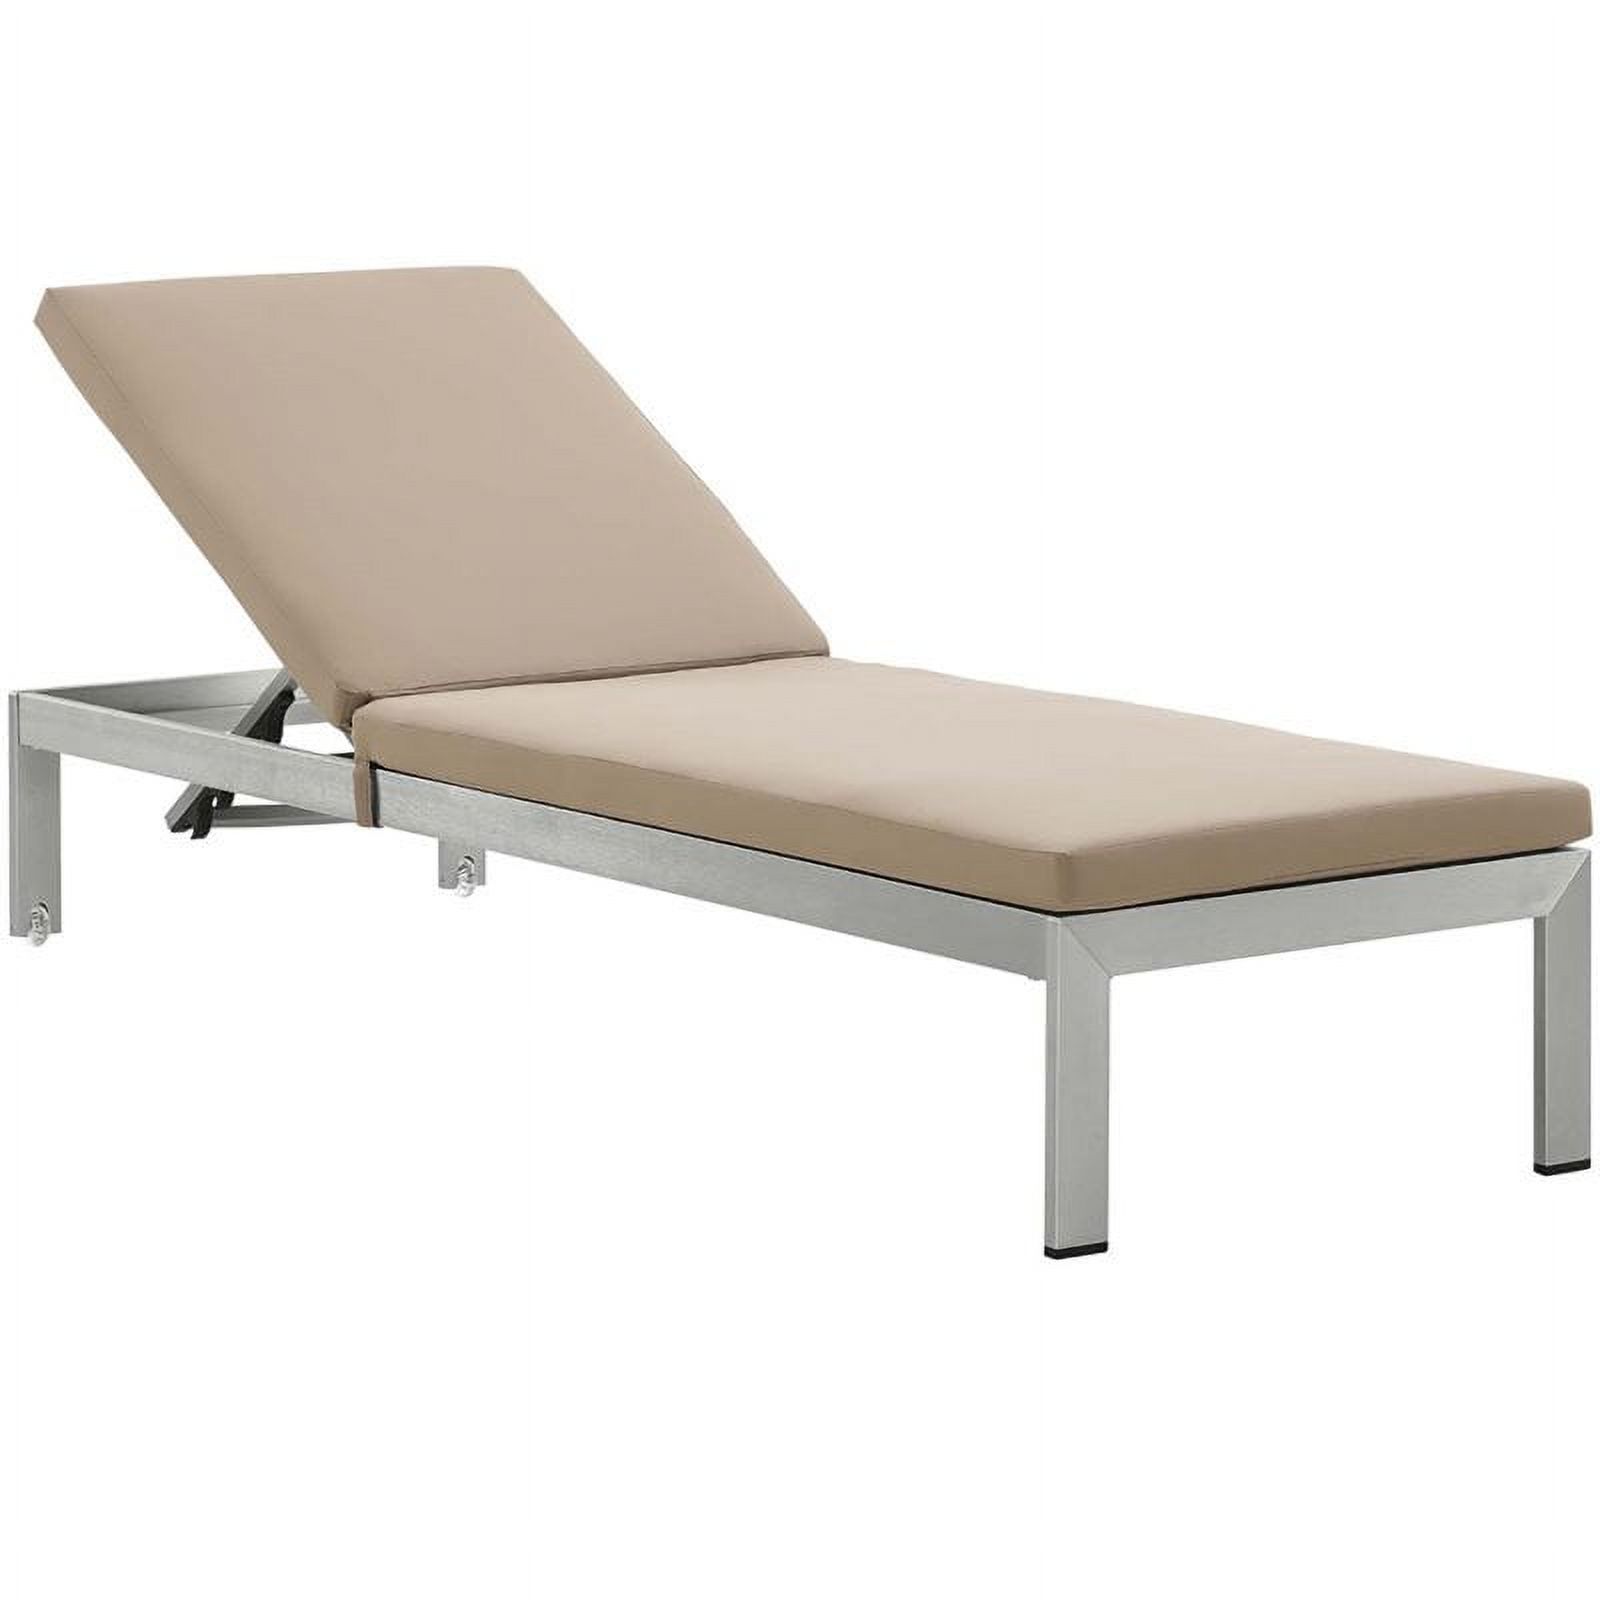 Pemberly Row  Plastic Wood Reclining Patio Chaise Lounge in Silver and Mocha - image 1 of 4